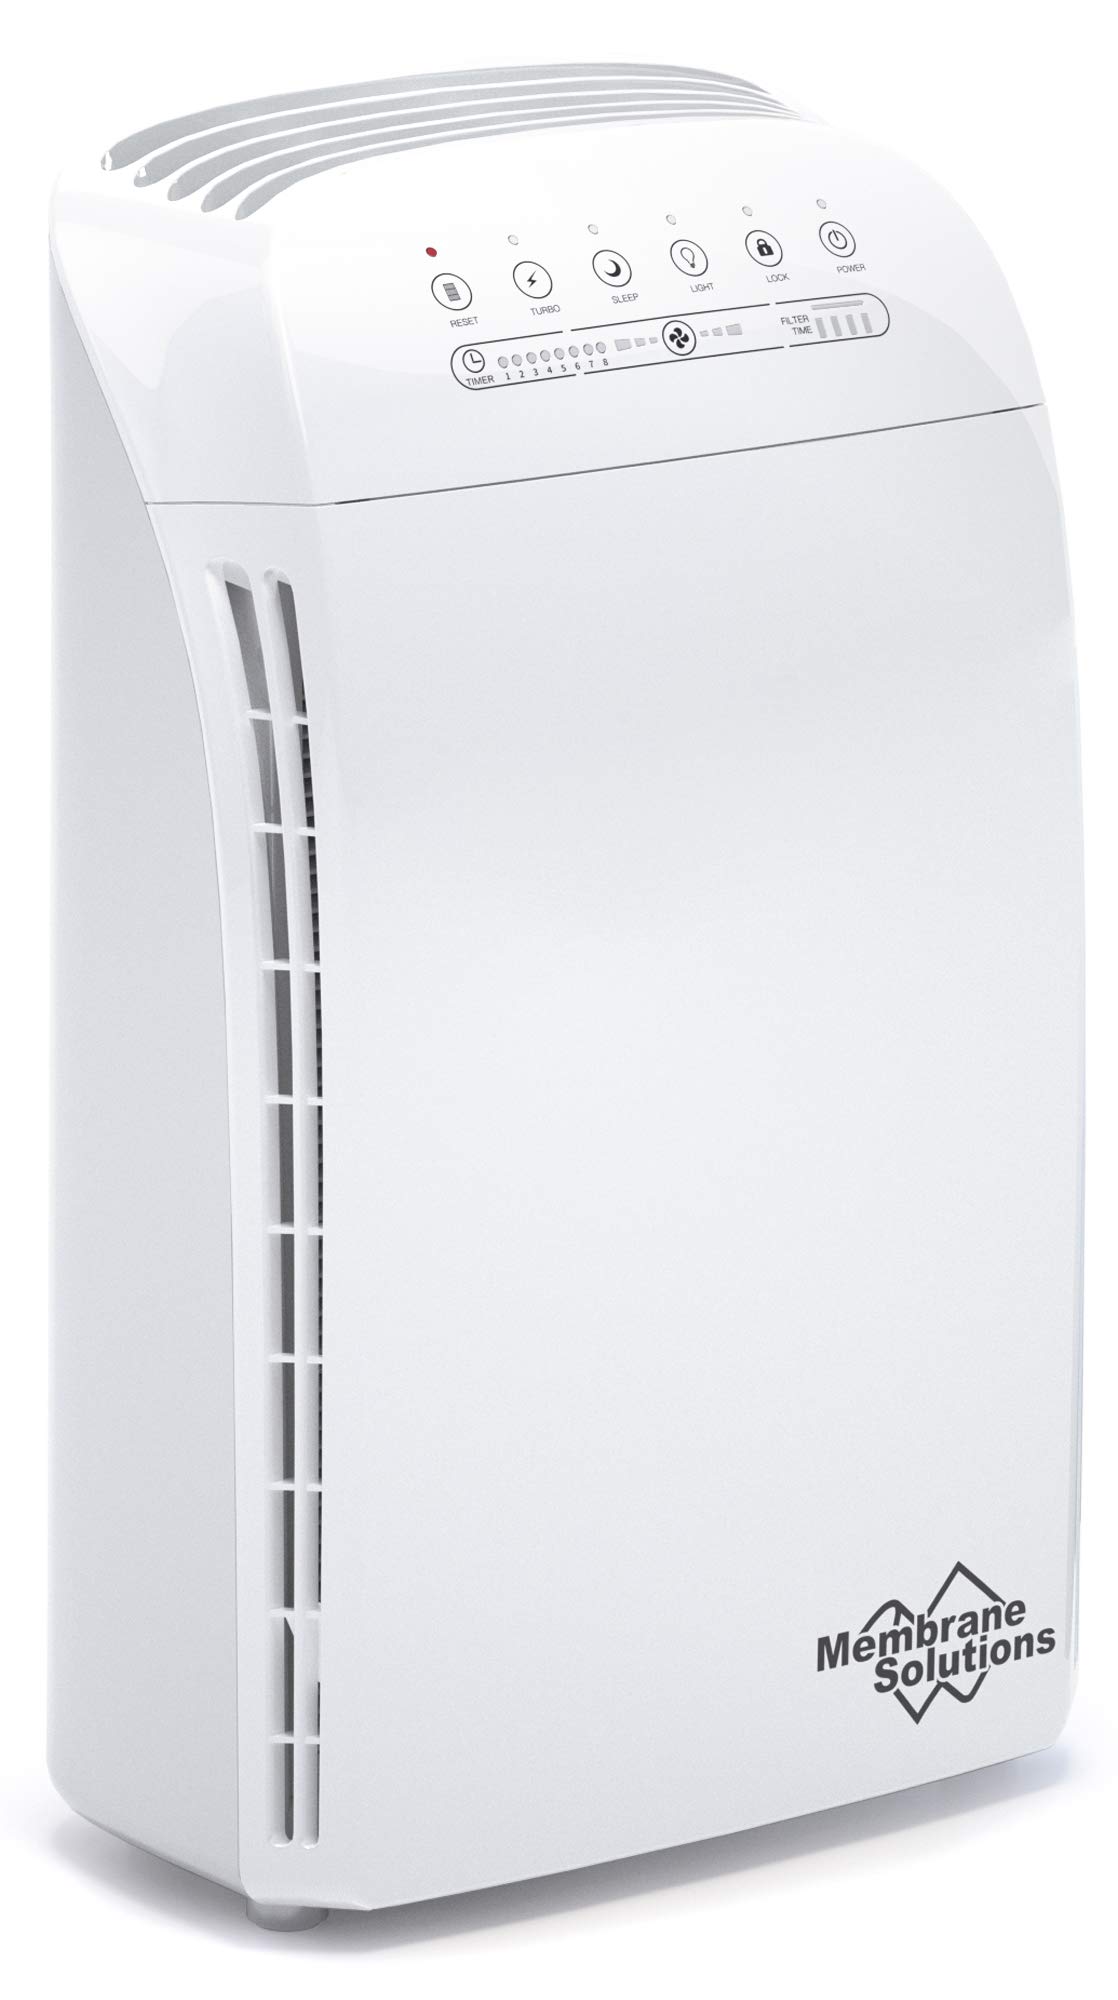 Membrane Solutions MSA3 / MSA3S Air Purifier for Home L...